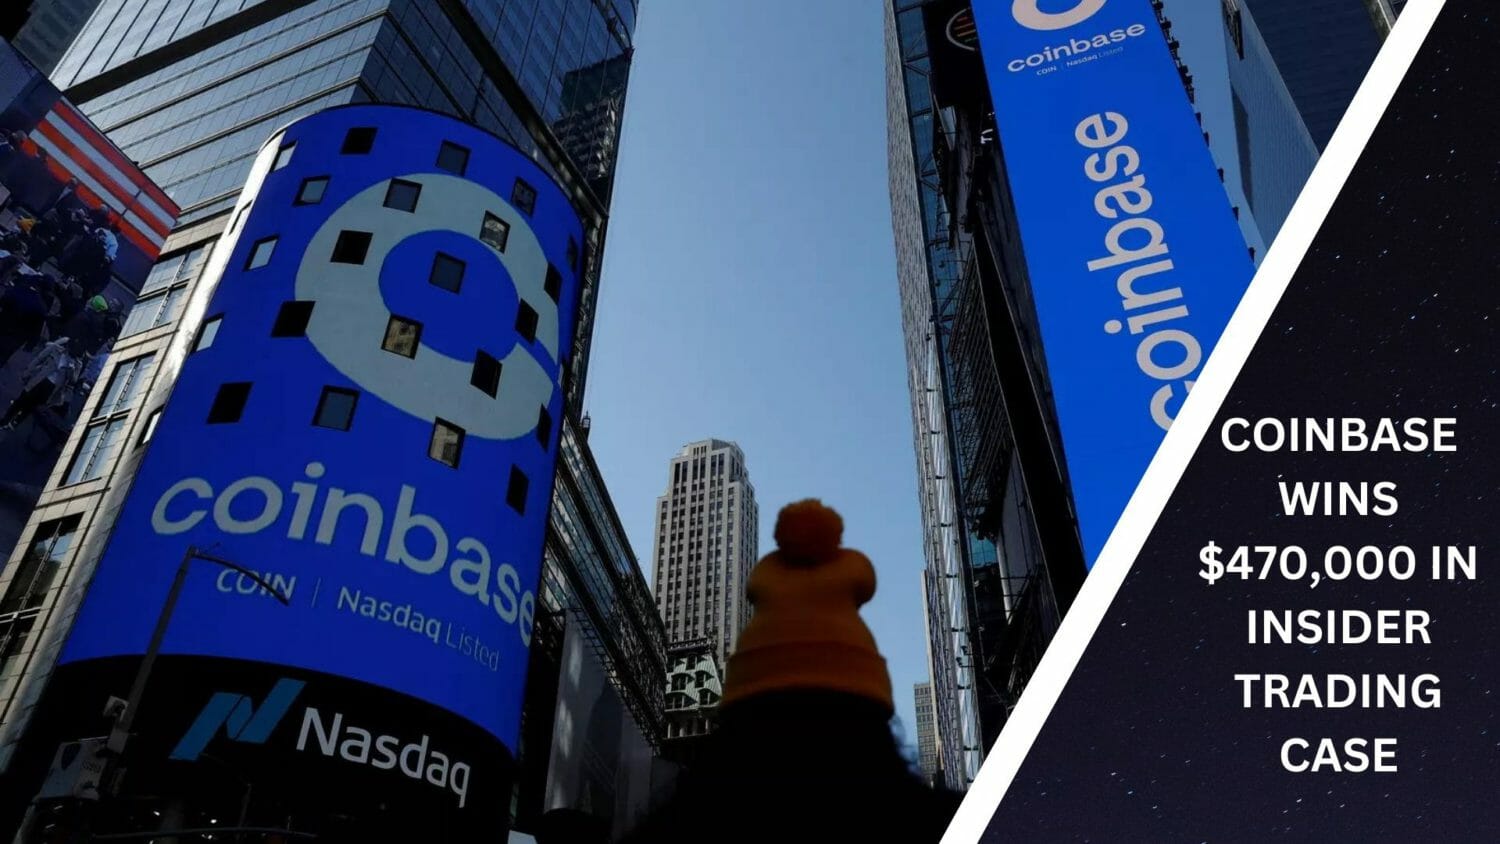 Coinbase Wins $470,000 In Insider Trading Case